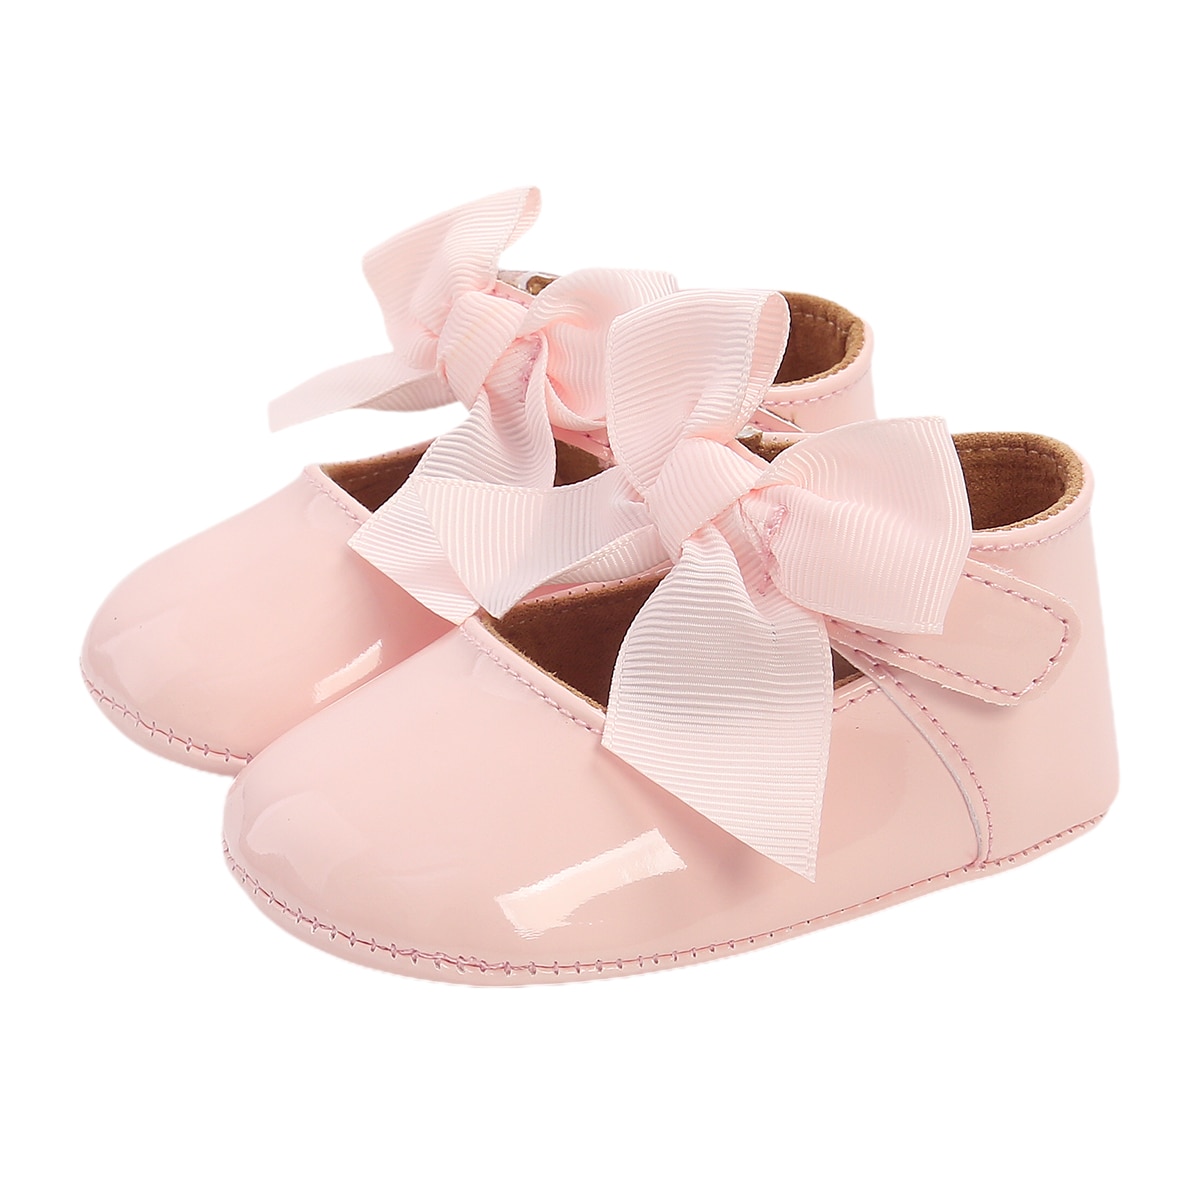 Baby Girls Solid First Walker Shoes Infant Newborn Soft Sole Bow Knot Princess Dress Mary Jane Flats Prewalker Shoes 0-18M